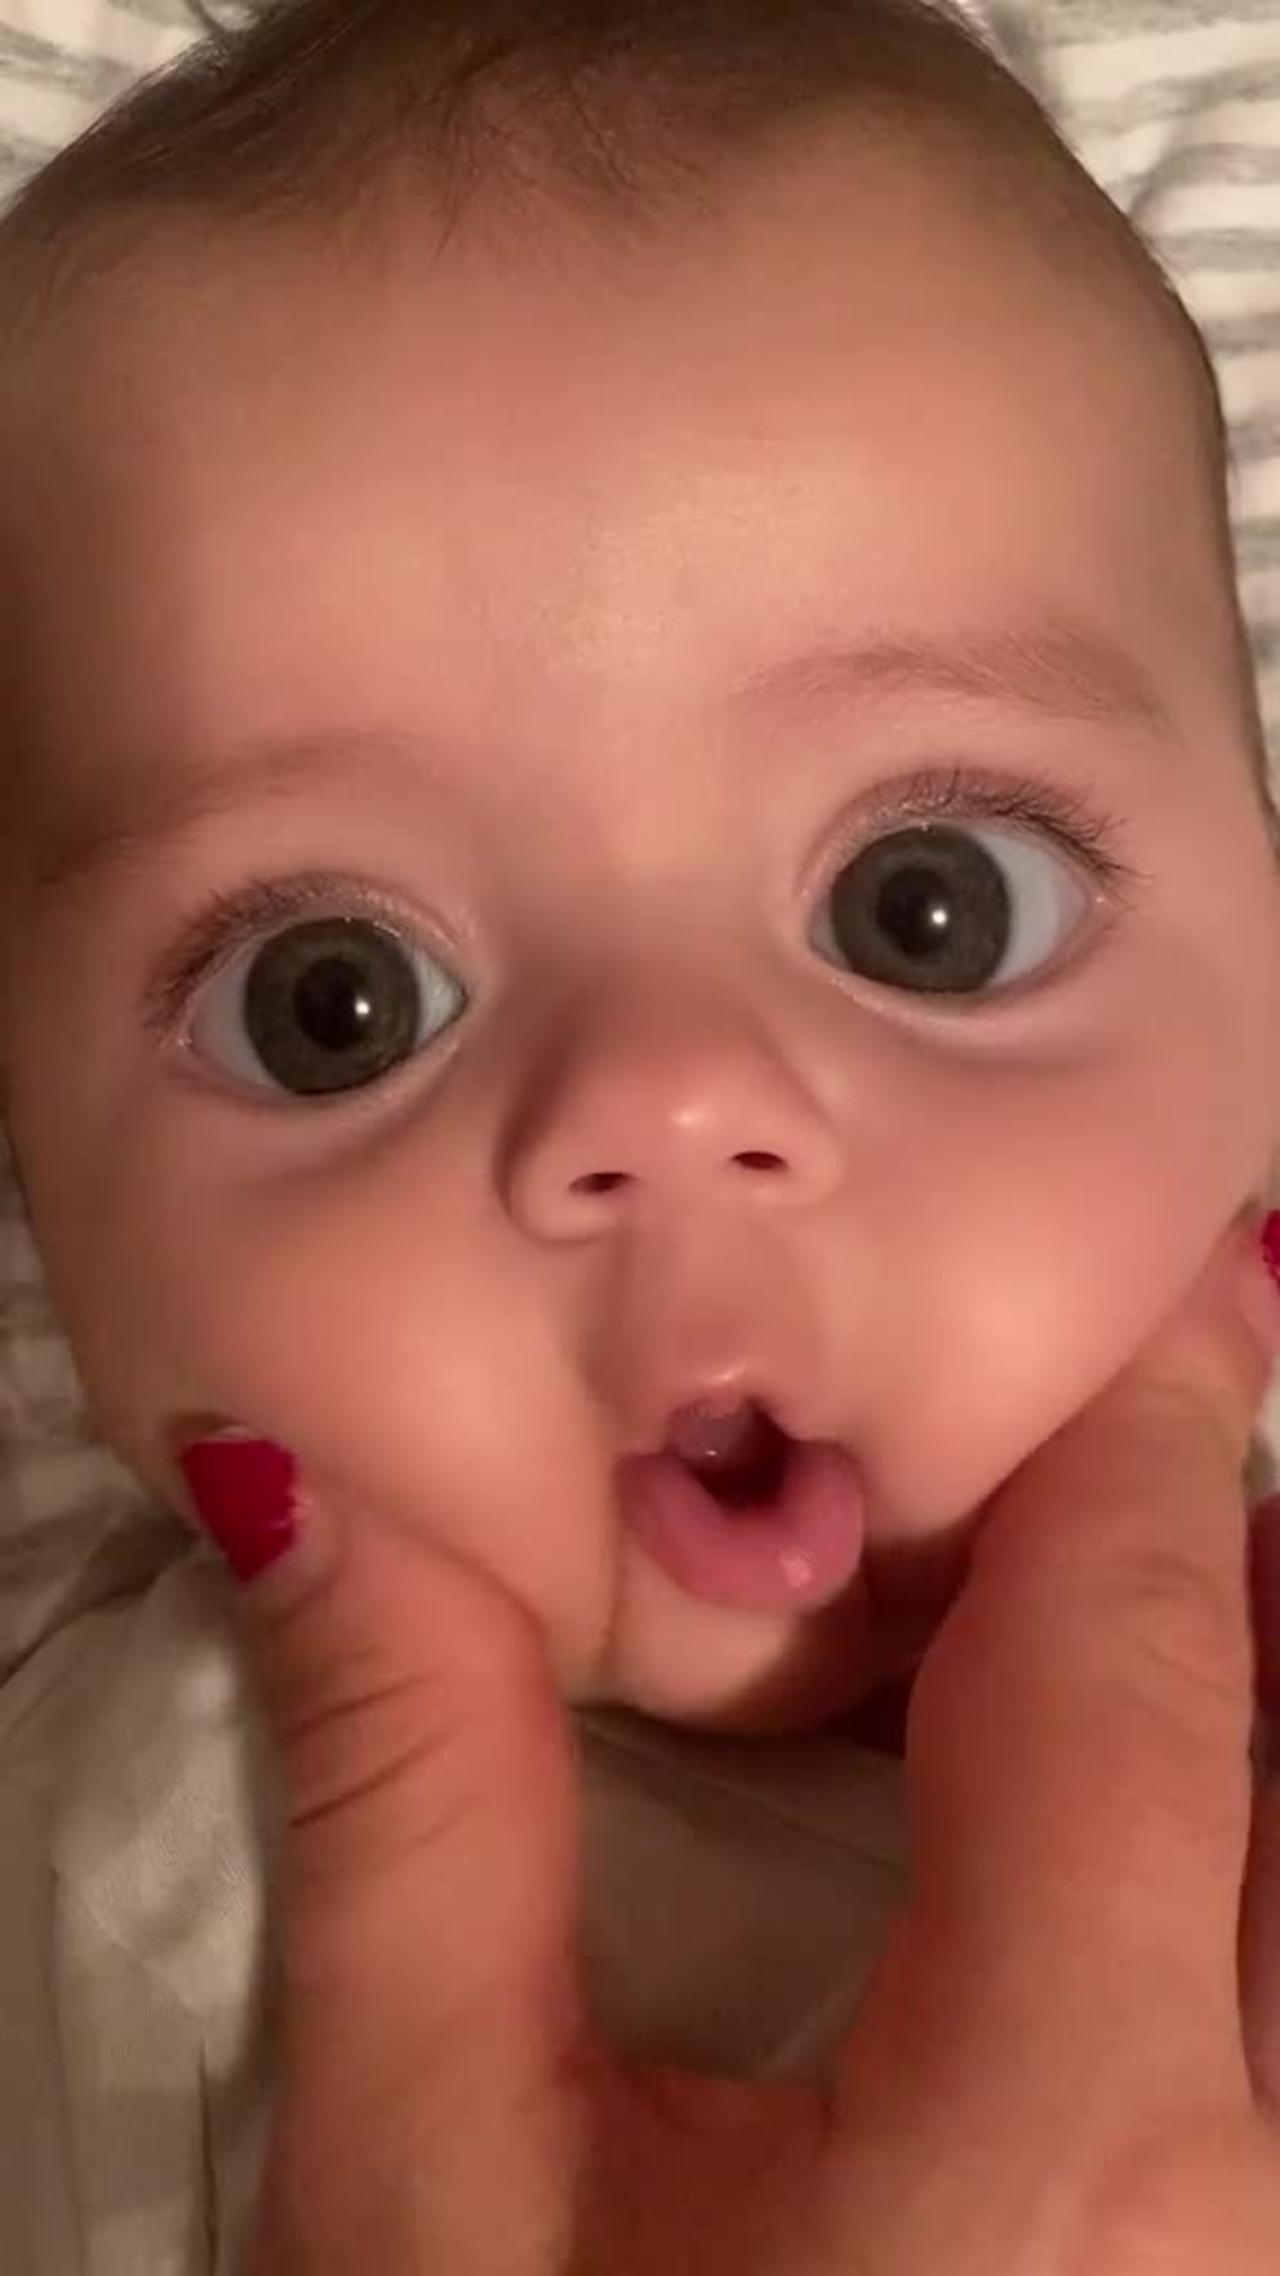 A video of the most beautiful baby girl in the world